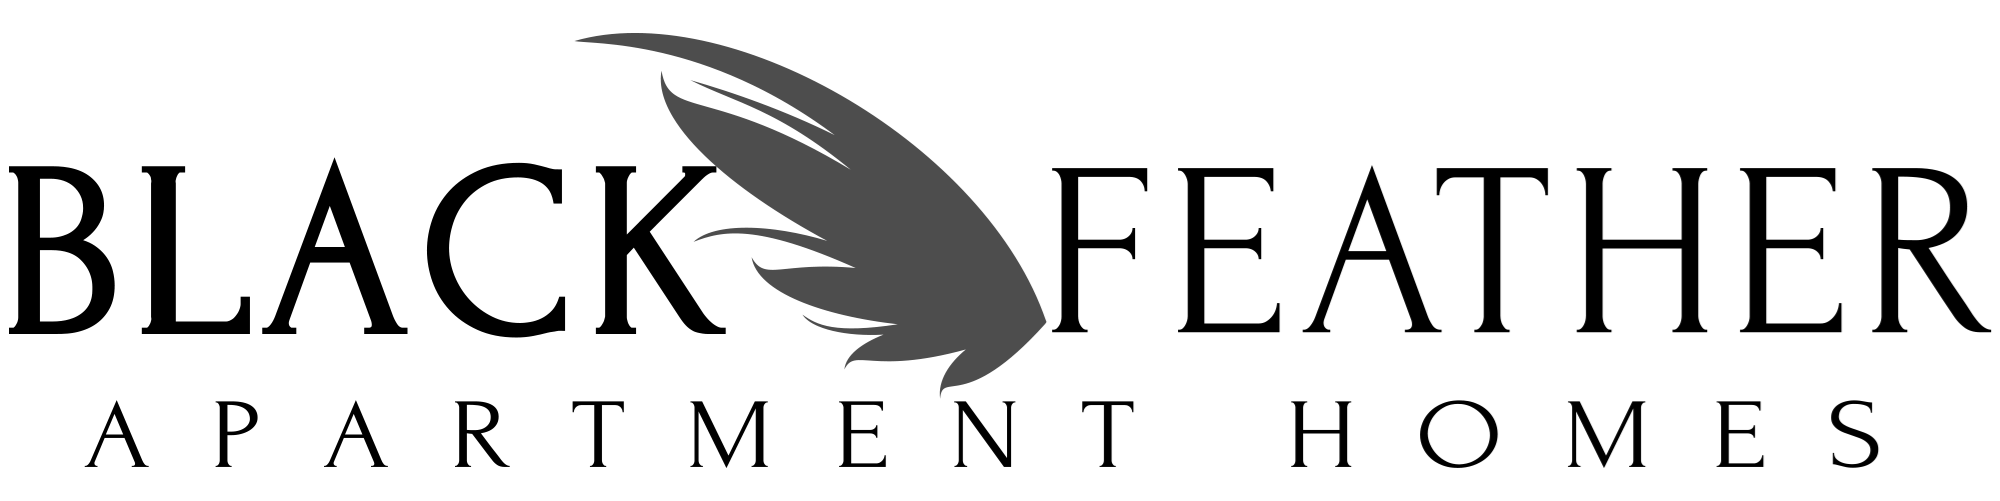 Feather H Logo - Black Feather Apartment Homes | Apartments in Castle Rock, CO |